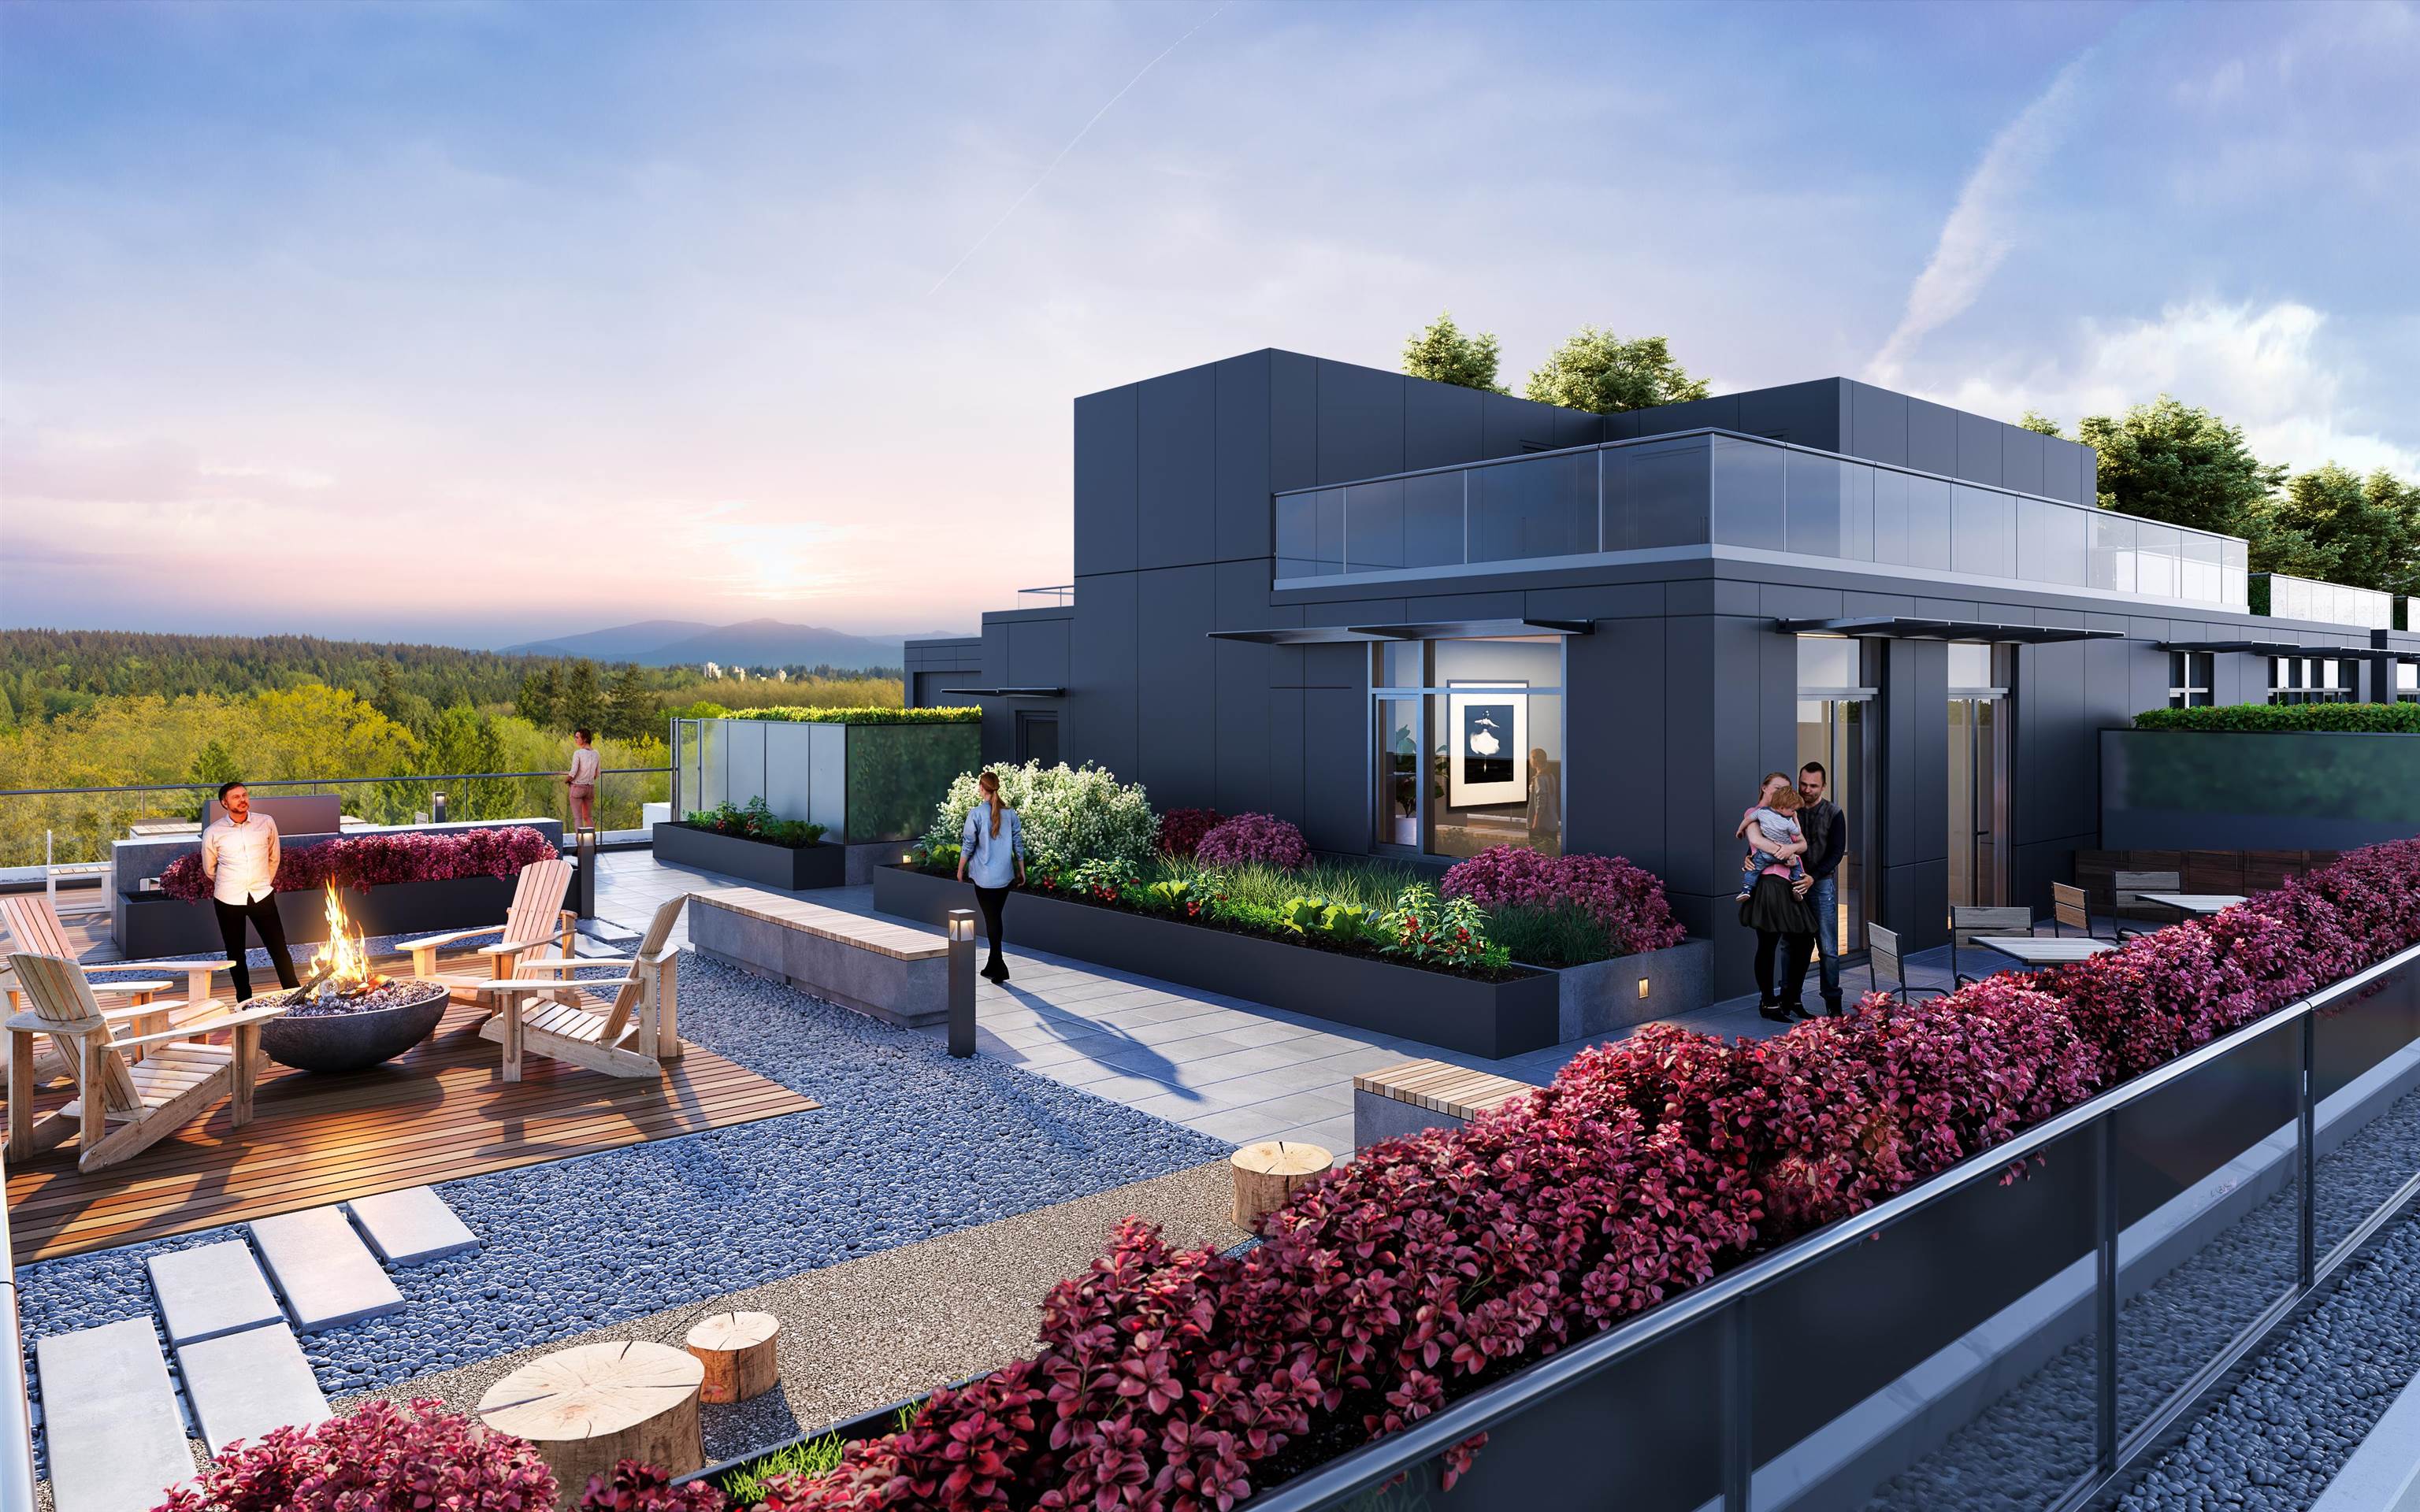 Rendering is illustration of rooftop lounge with fire bowl and illuminated terrace.